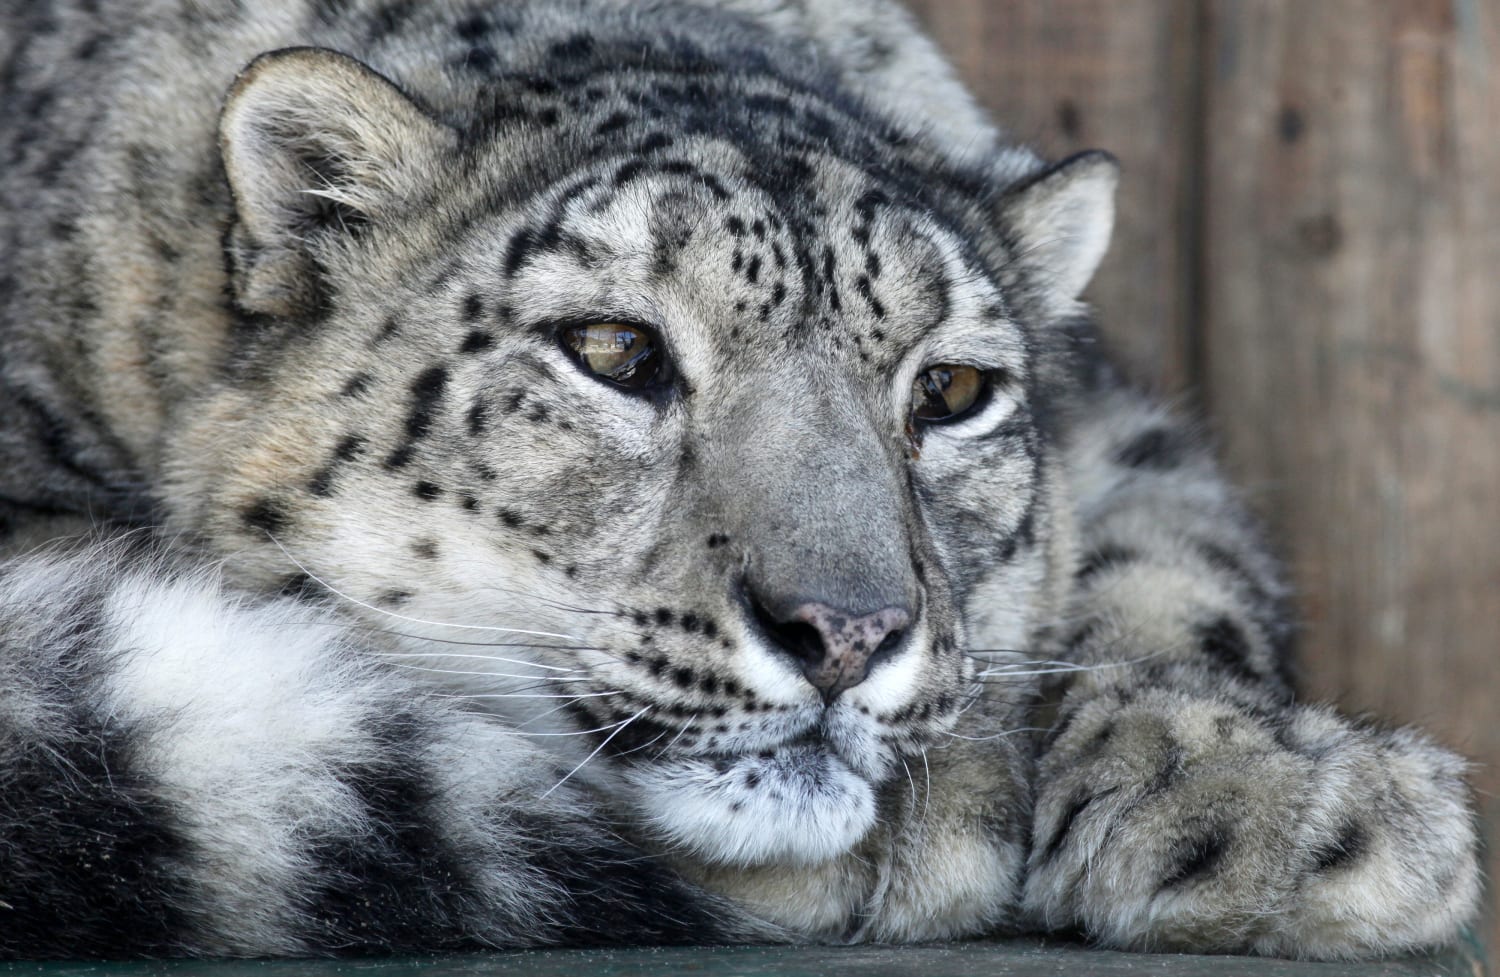 Russian Conservationists Launch Survey of Elusive Snow Leopard